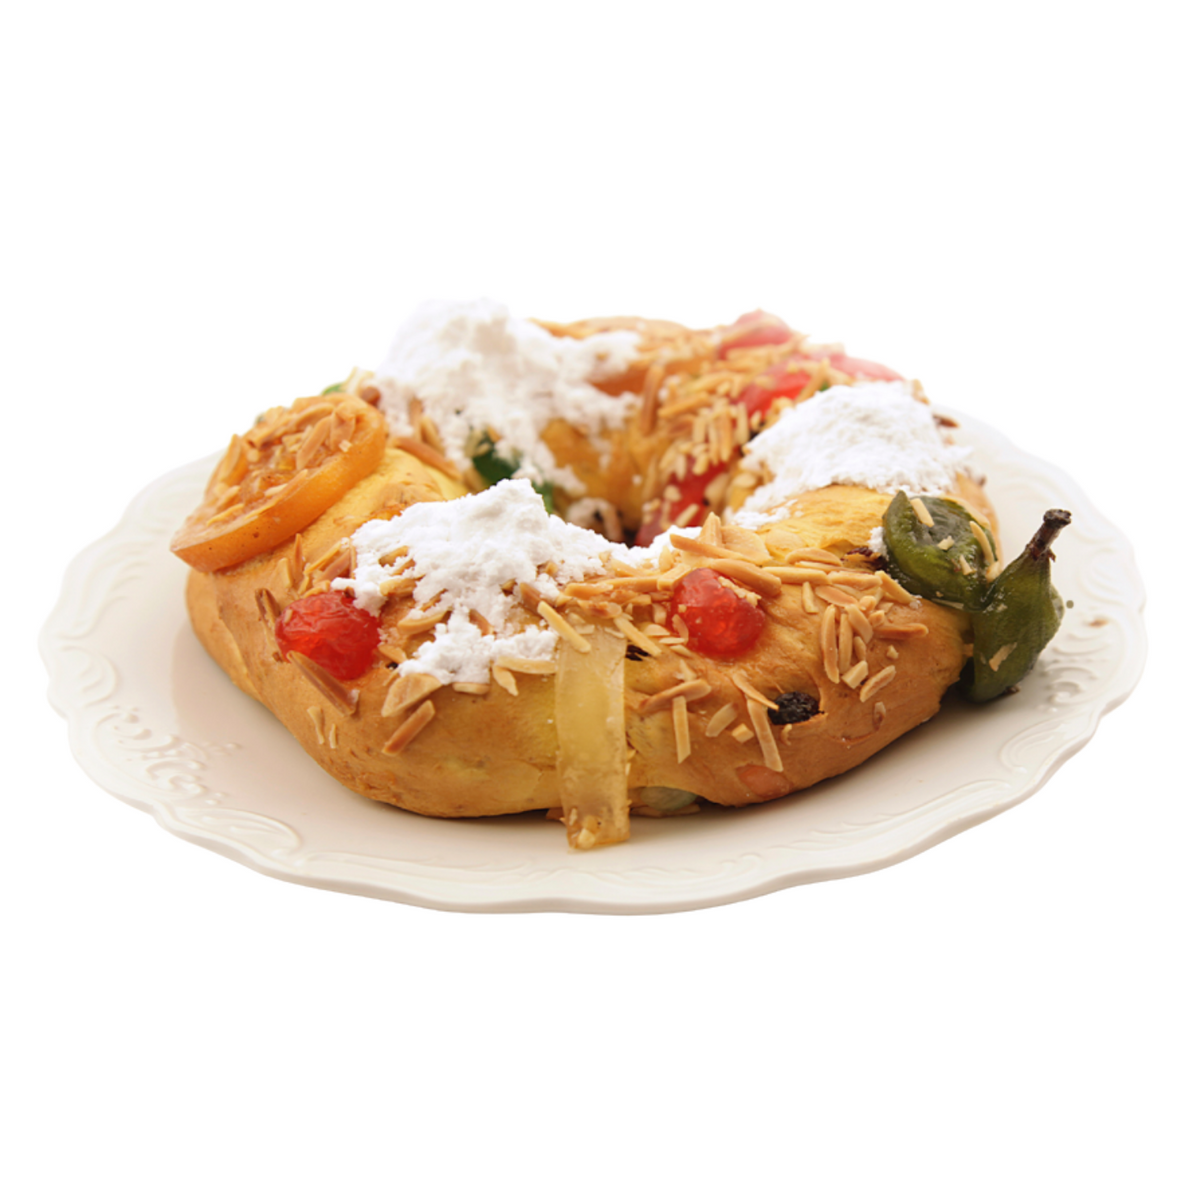 Bolo rei or king cake, a traditional cake that is eaten for